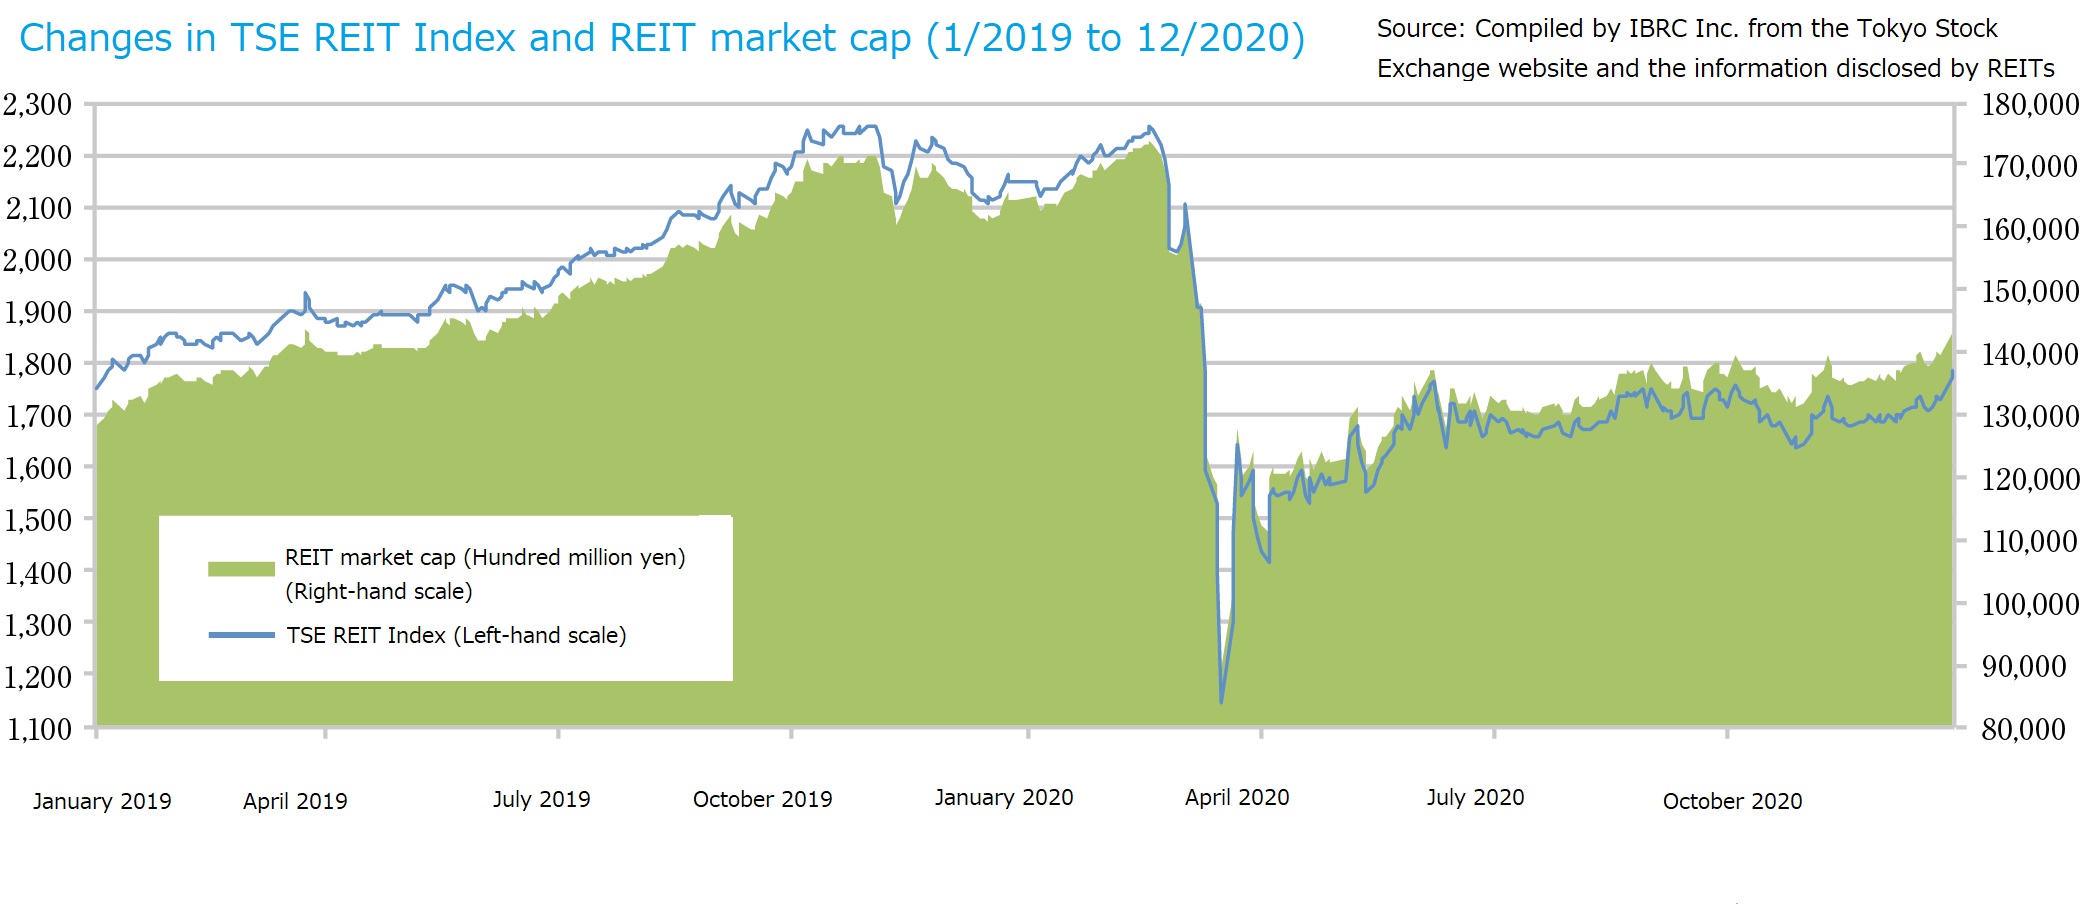 J-REIT Index rose toward the end of 2020, and assets under management reached JPY 20 trillion.